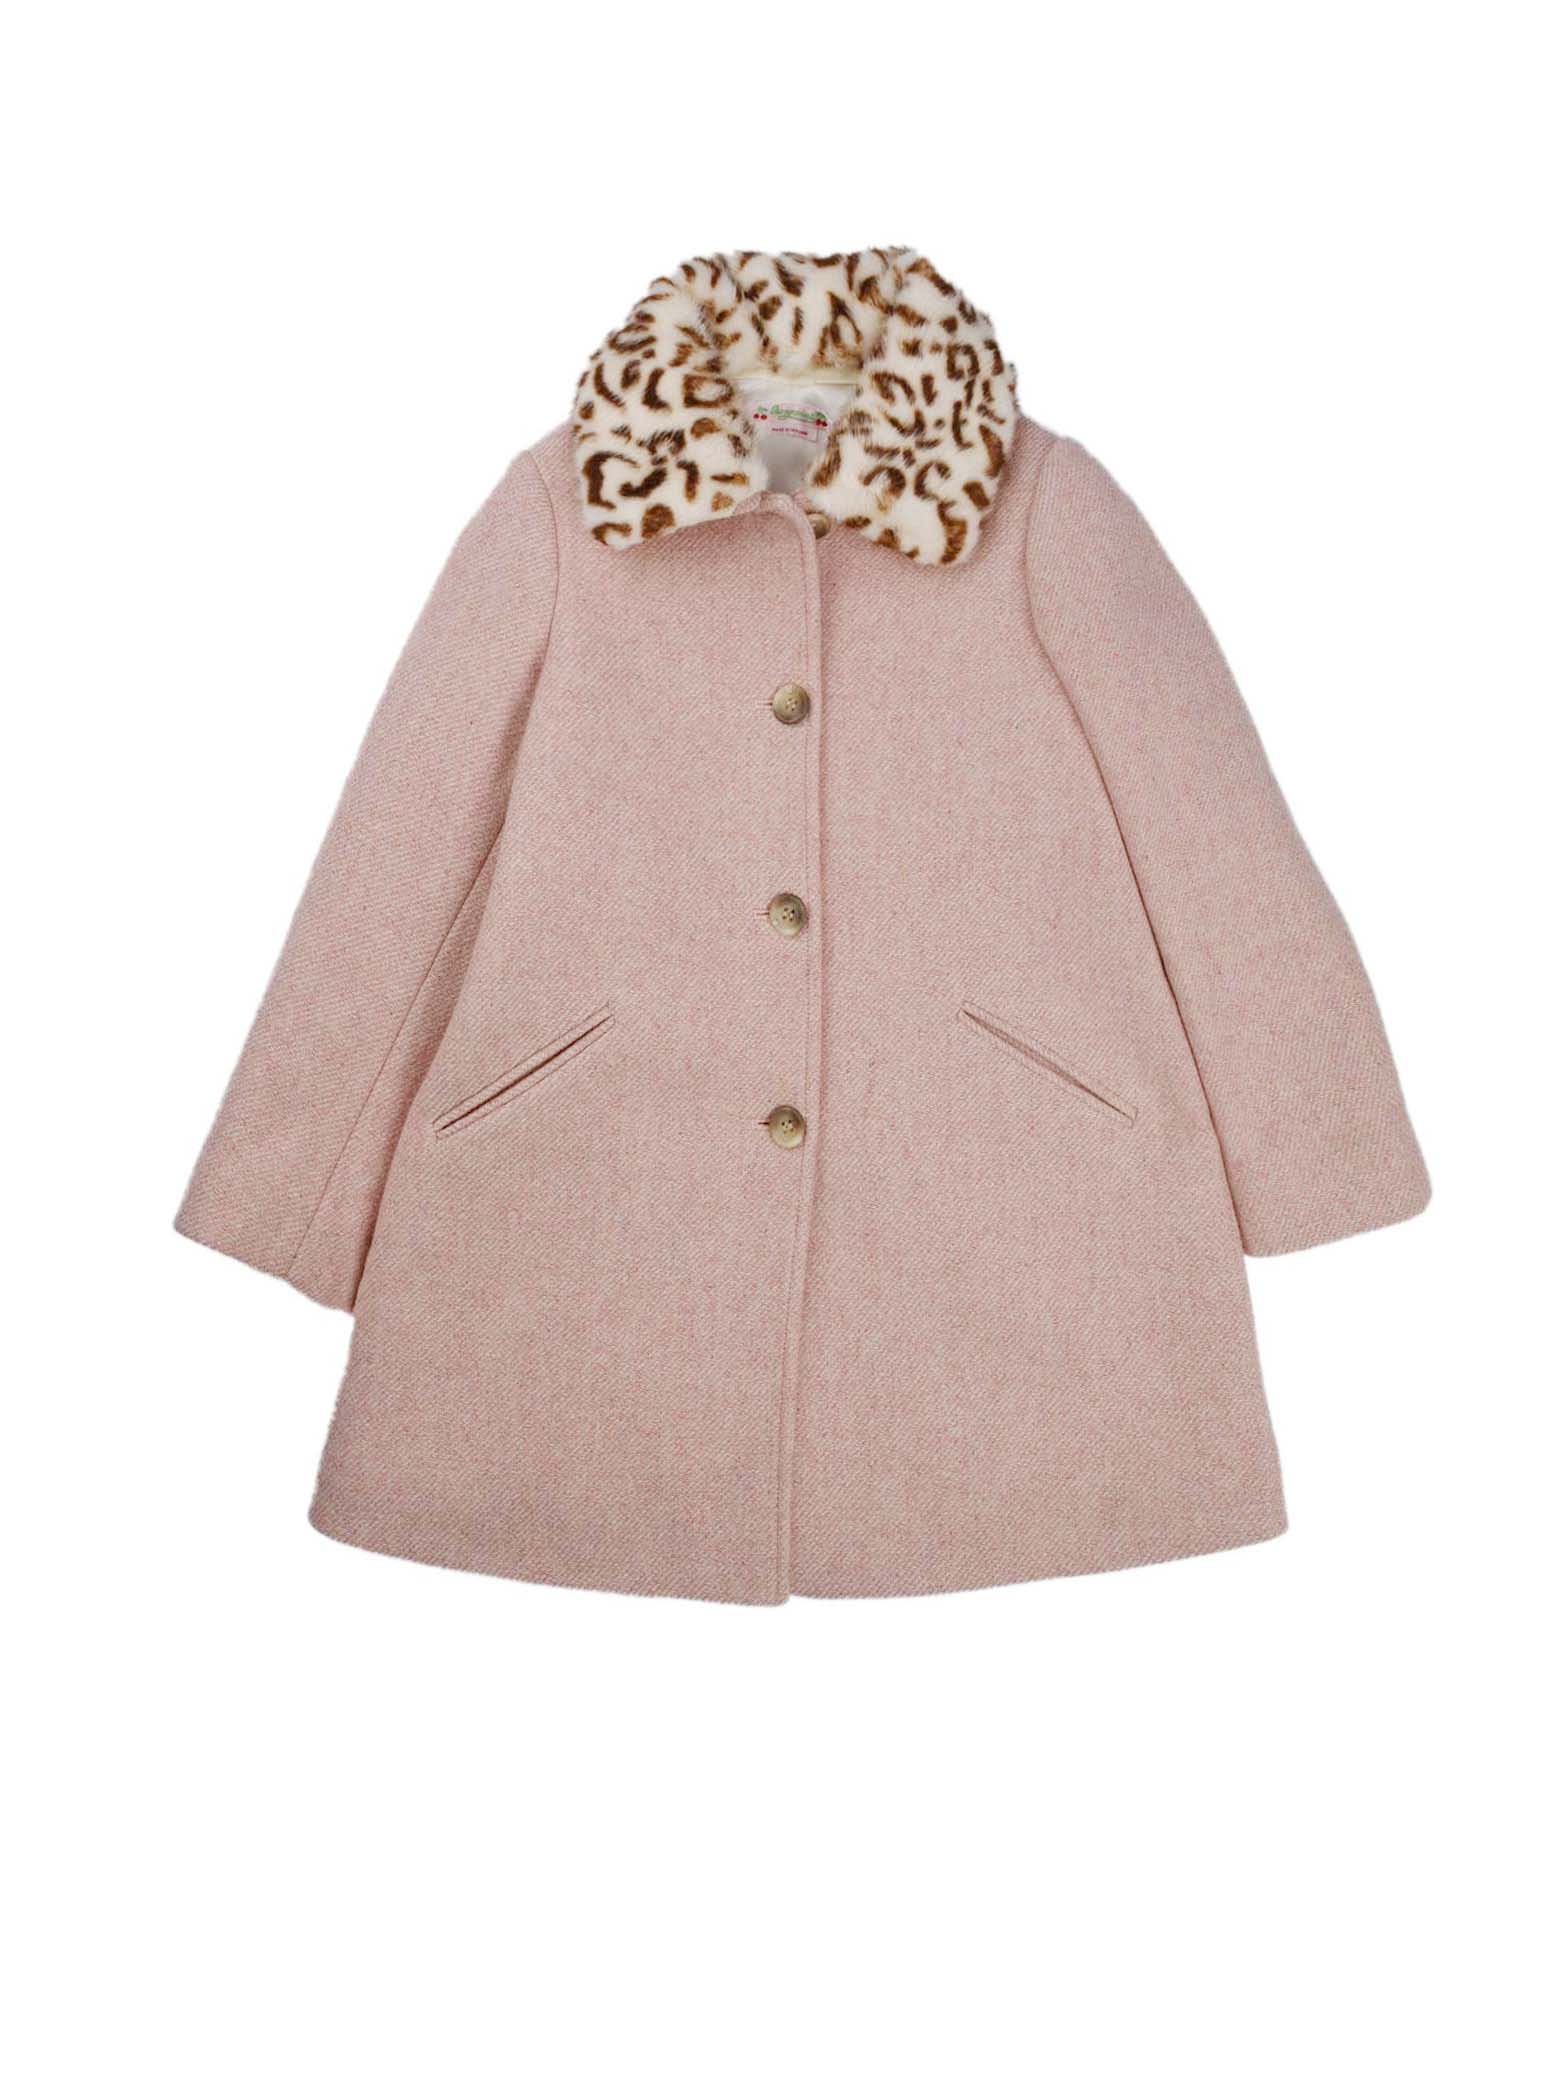 Bonpoint Pink Coat With Fur